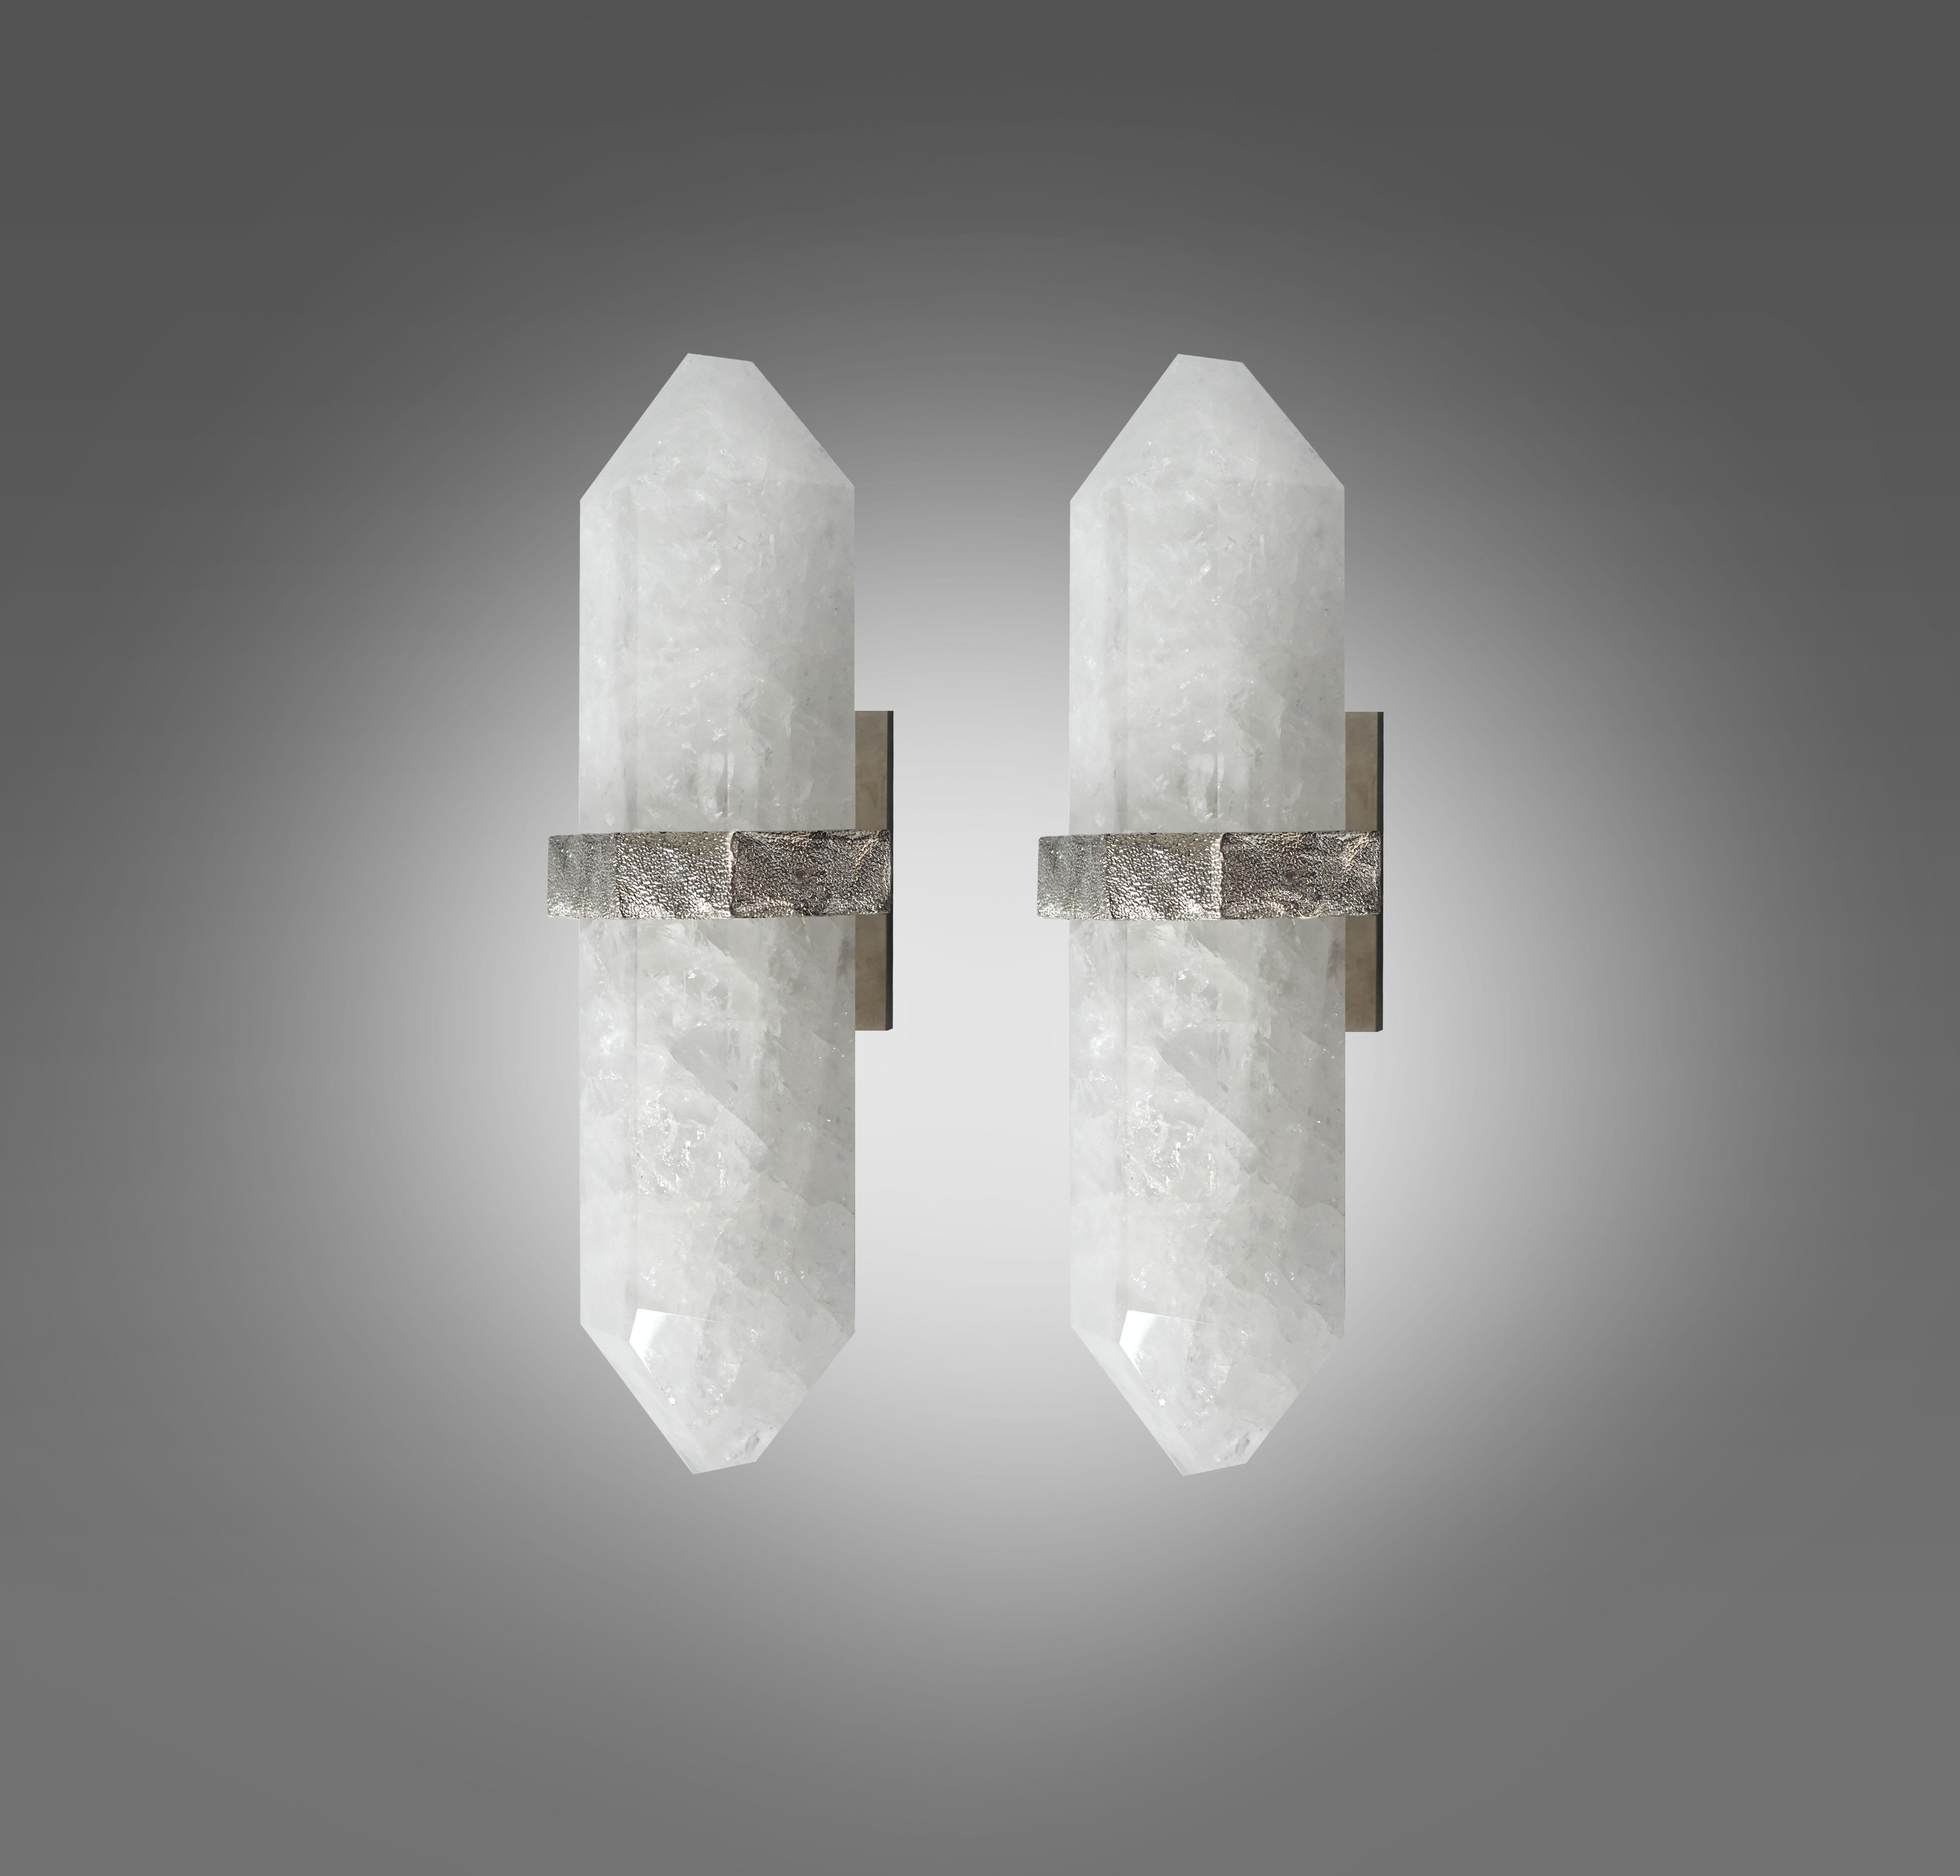 Group of six fine carved diamond form rock crystal quartz wall sconces, mount with rich texture of cast nickel plating decoration, created by Phoenix Gallery NYC. 
Custom size, finish, and quantity upon request. 
Each sconce installed two sockets,